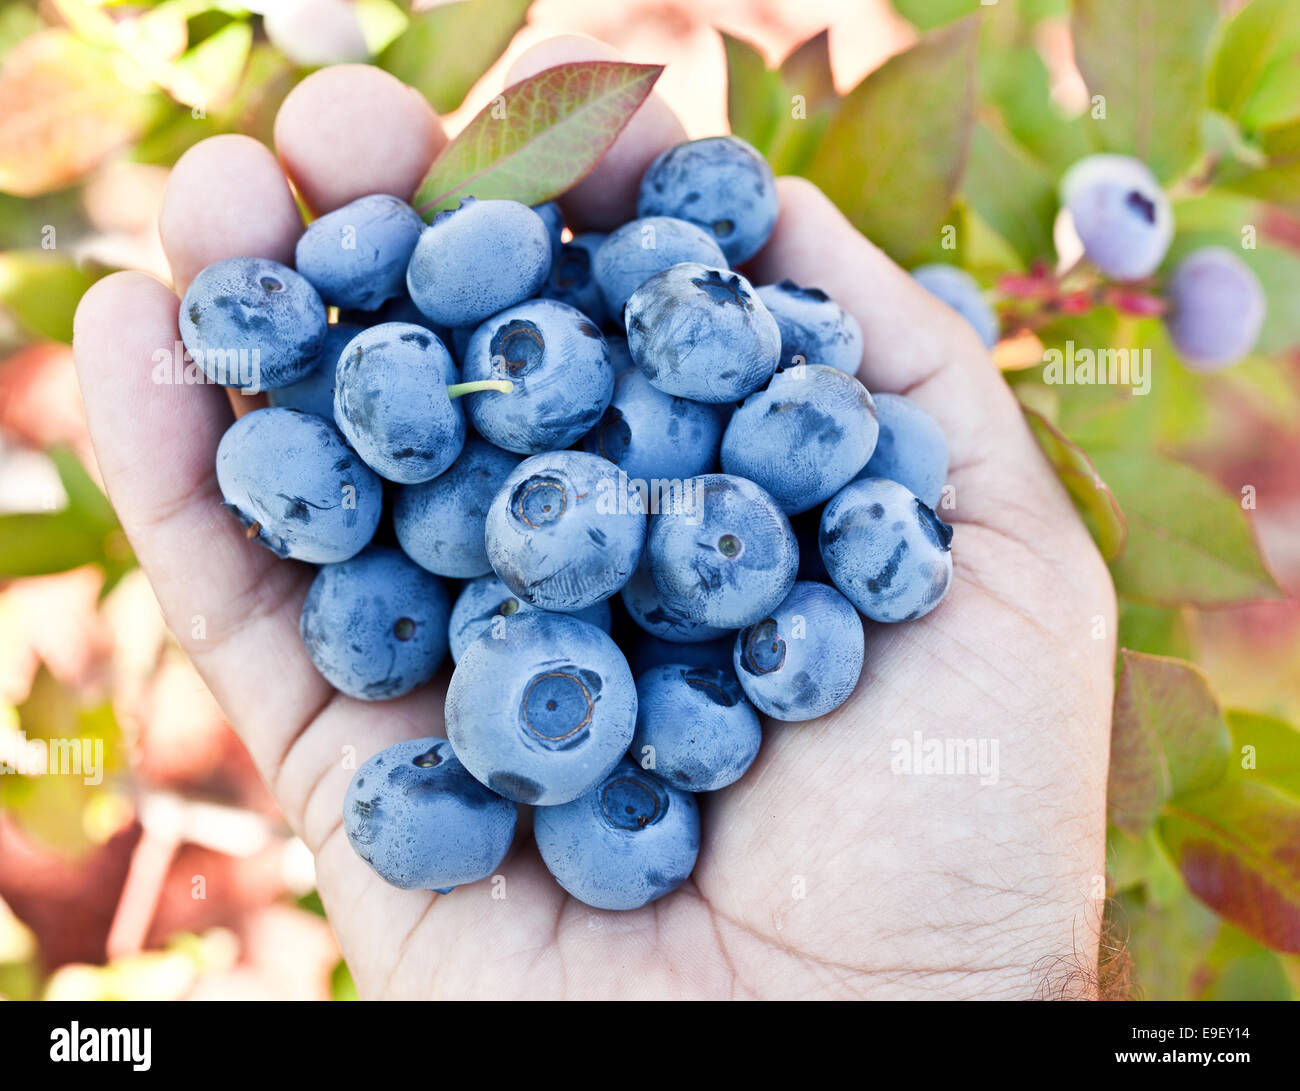 Blueberries in the man's hands. Green shrubs on the background. Stock Photo